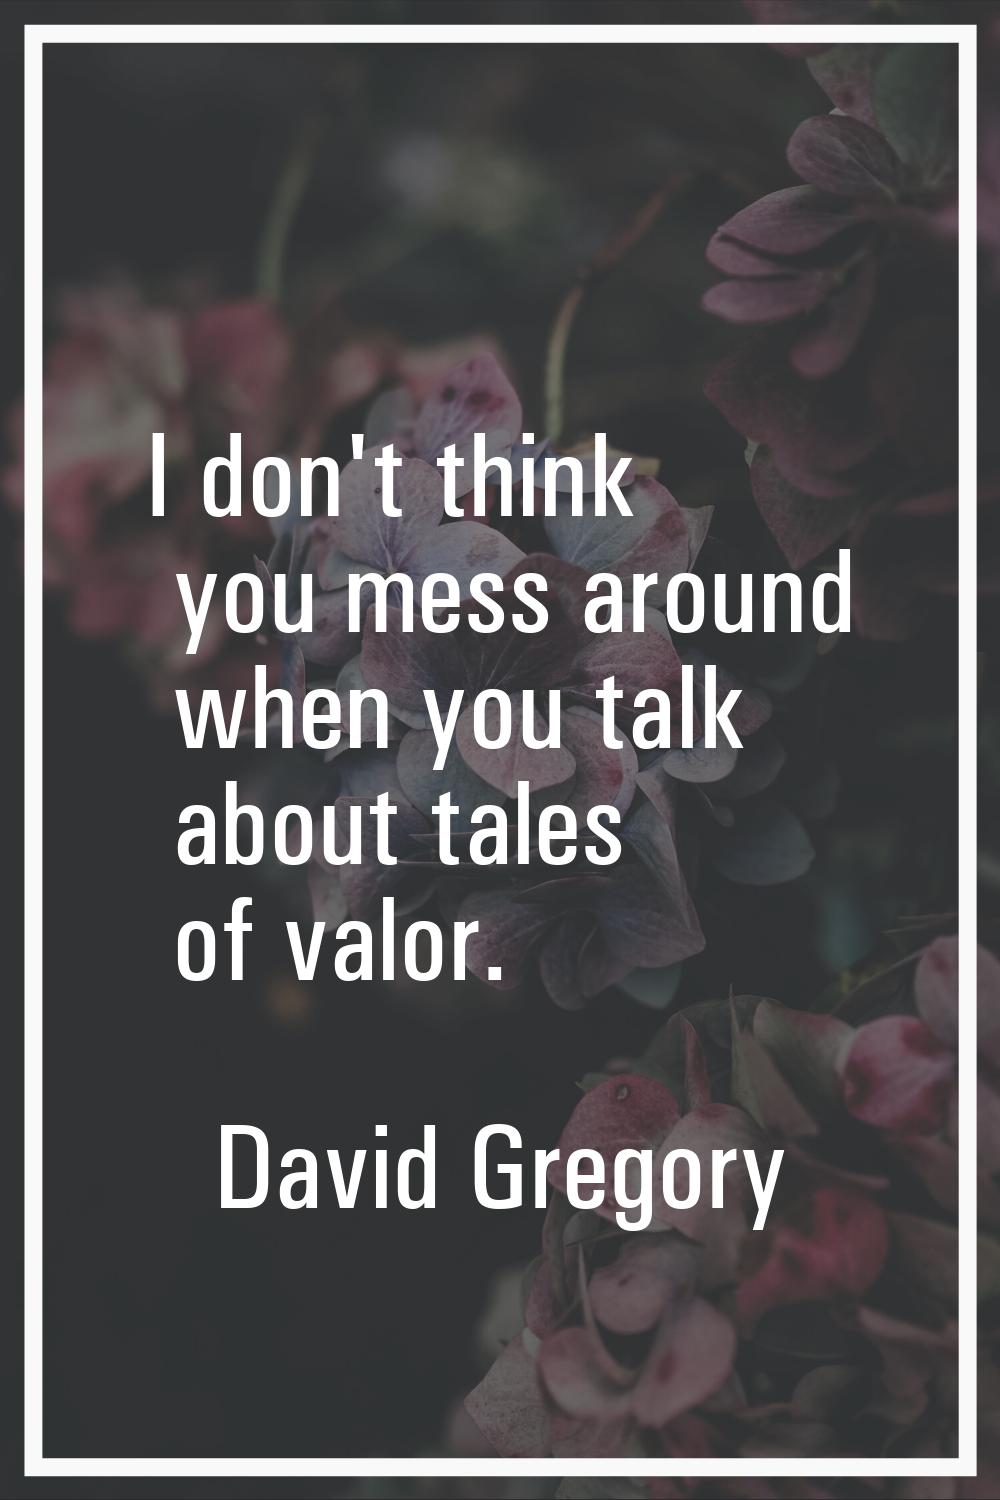 I don't think you mess around when you talk about tales of valor.